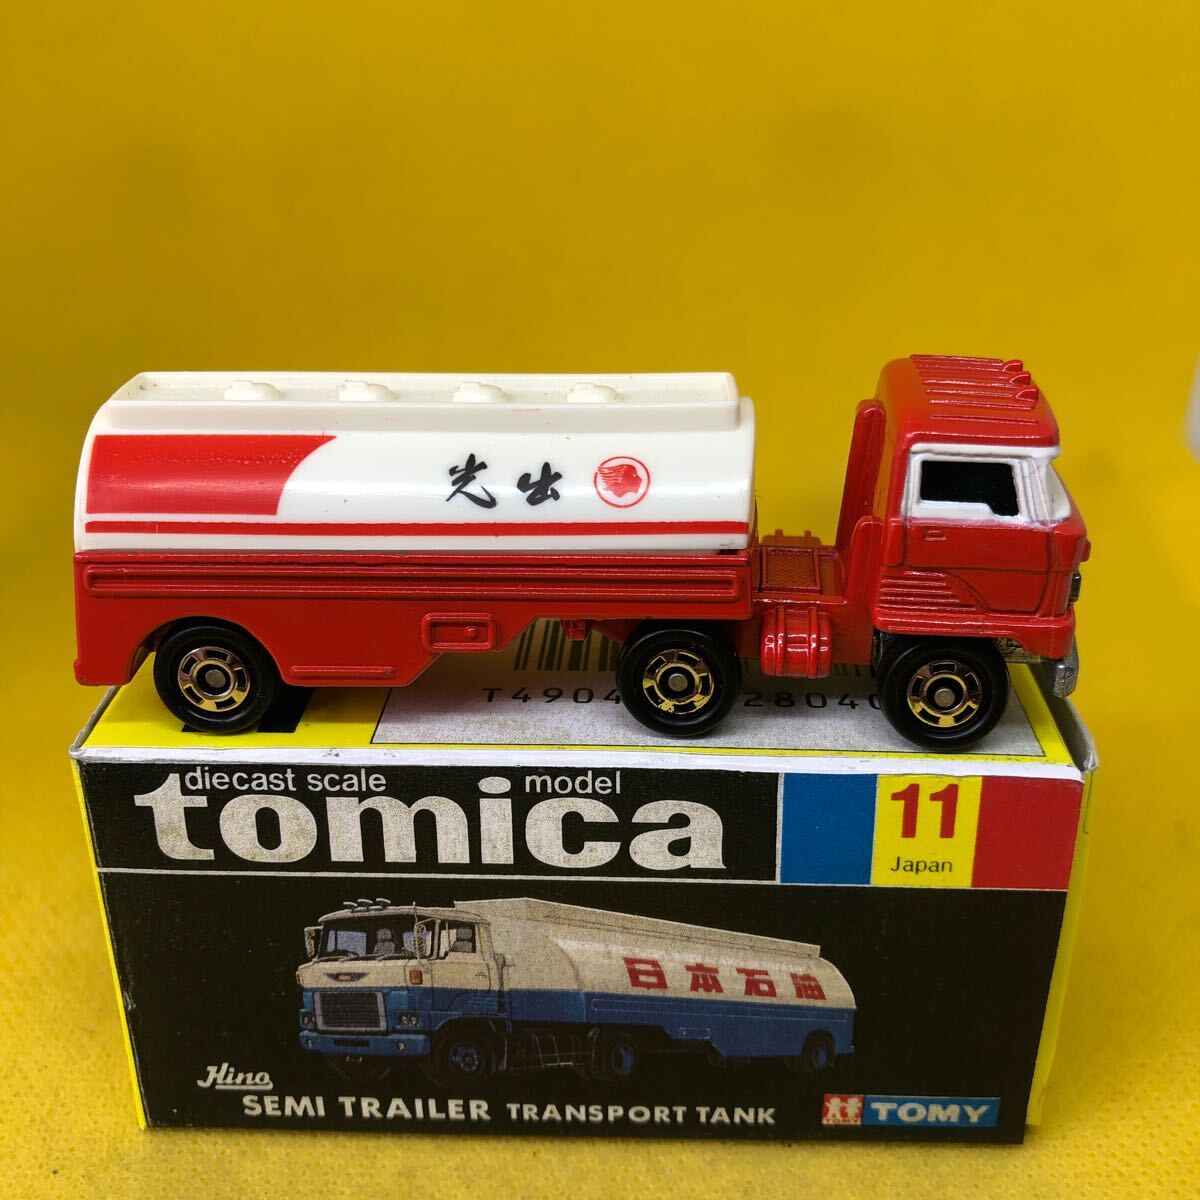  Tomica made in Japan black box 11 saec semi trailler trance port tanker that time thing out of print . light ②